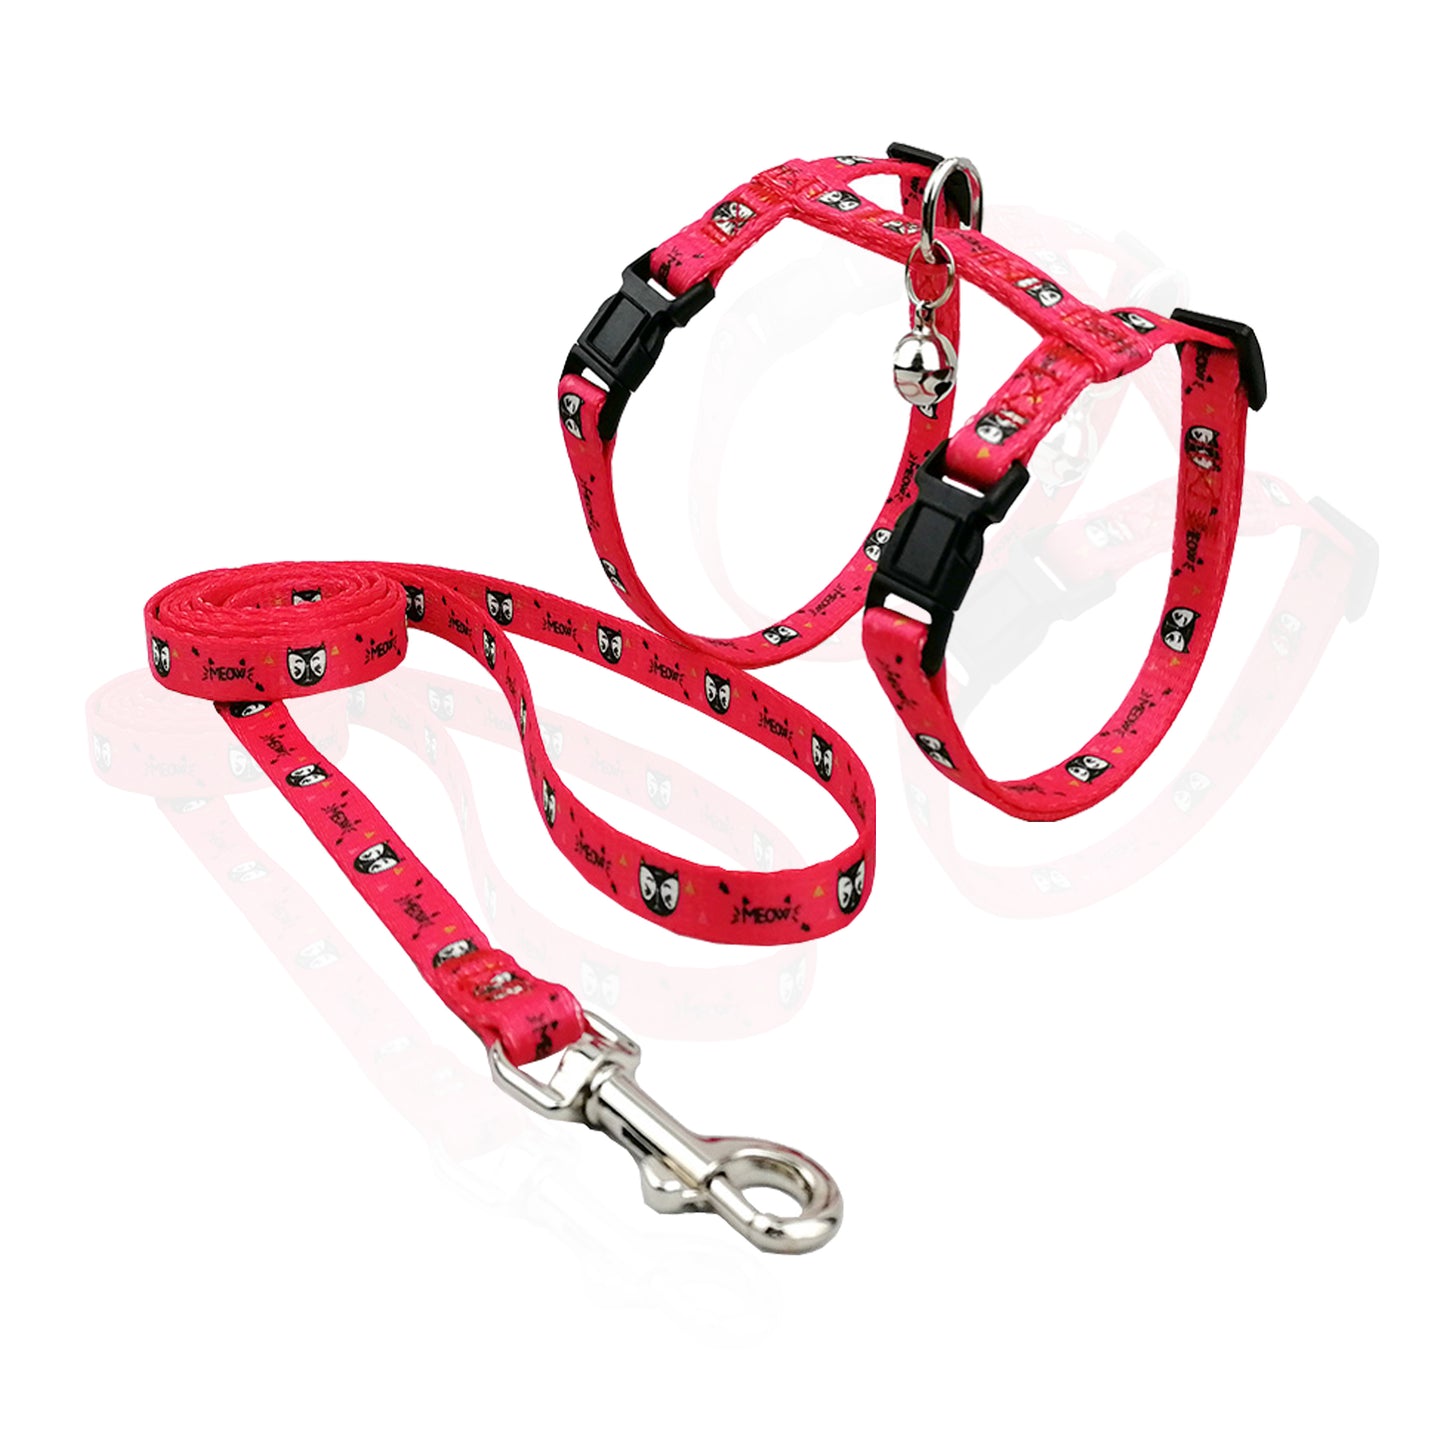 CAT HARNESS WITH LEASH MEOW CORAL SMALL